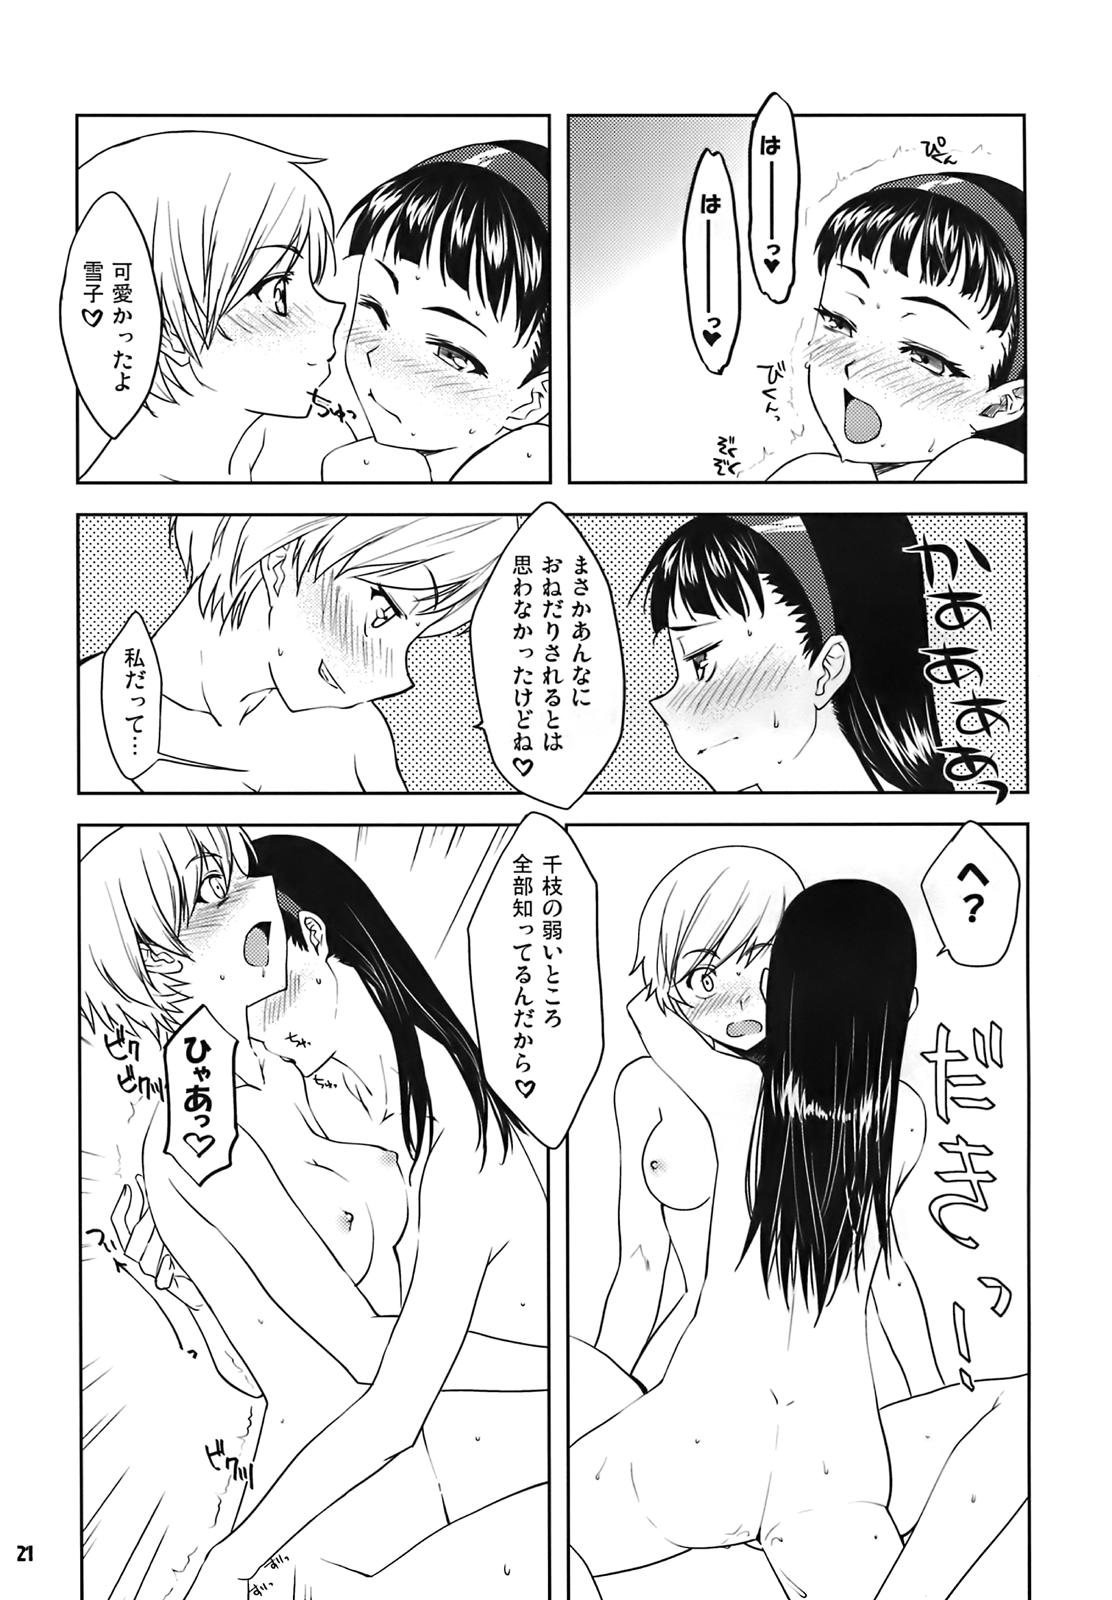 Fetish Love All - Persona 4 Girl On Girl - Page 9